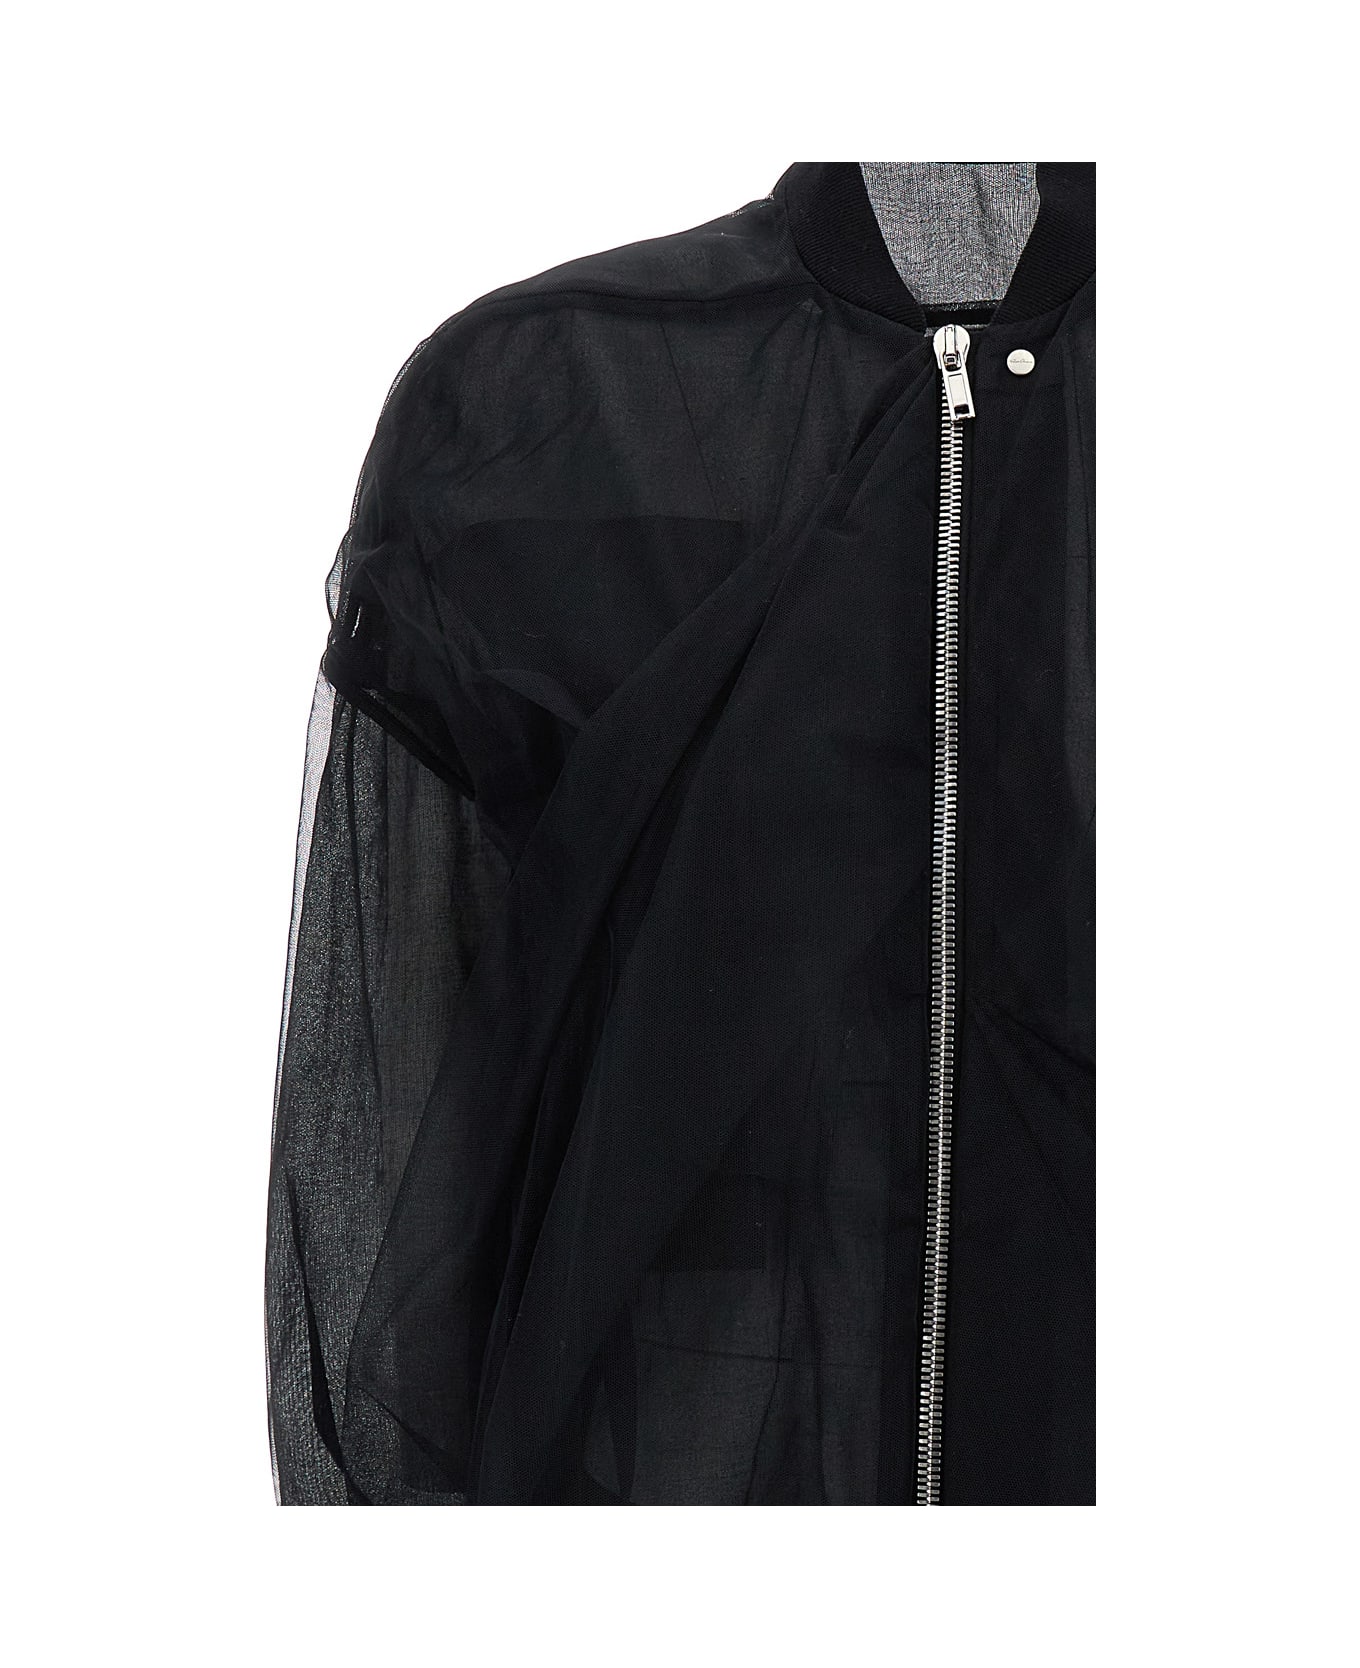 Rick Owens Black Jacket With Tulle Design In Technical Fabric Woman - Black